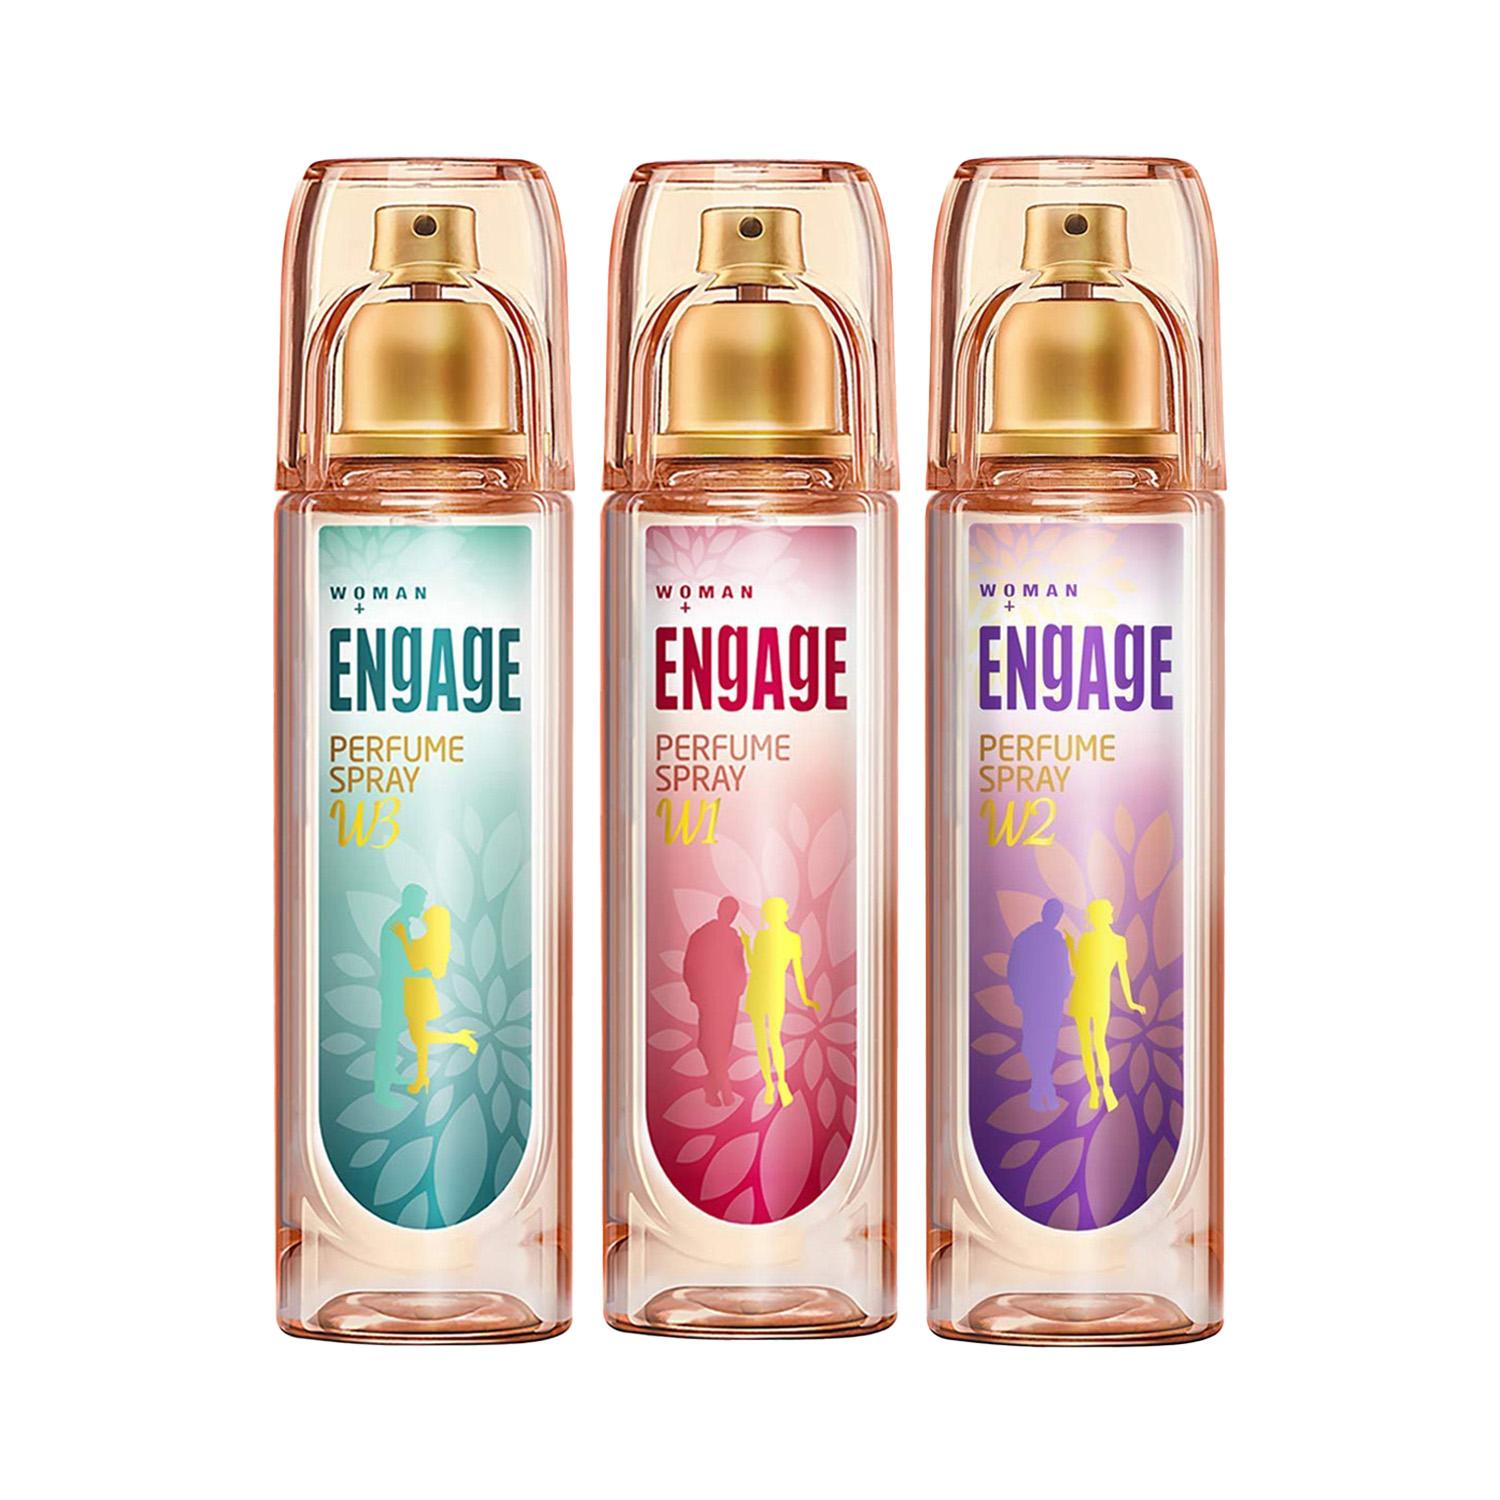 Engage | Engage W3, W2 & W3 Perfume Spray For Women Combo